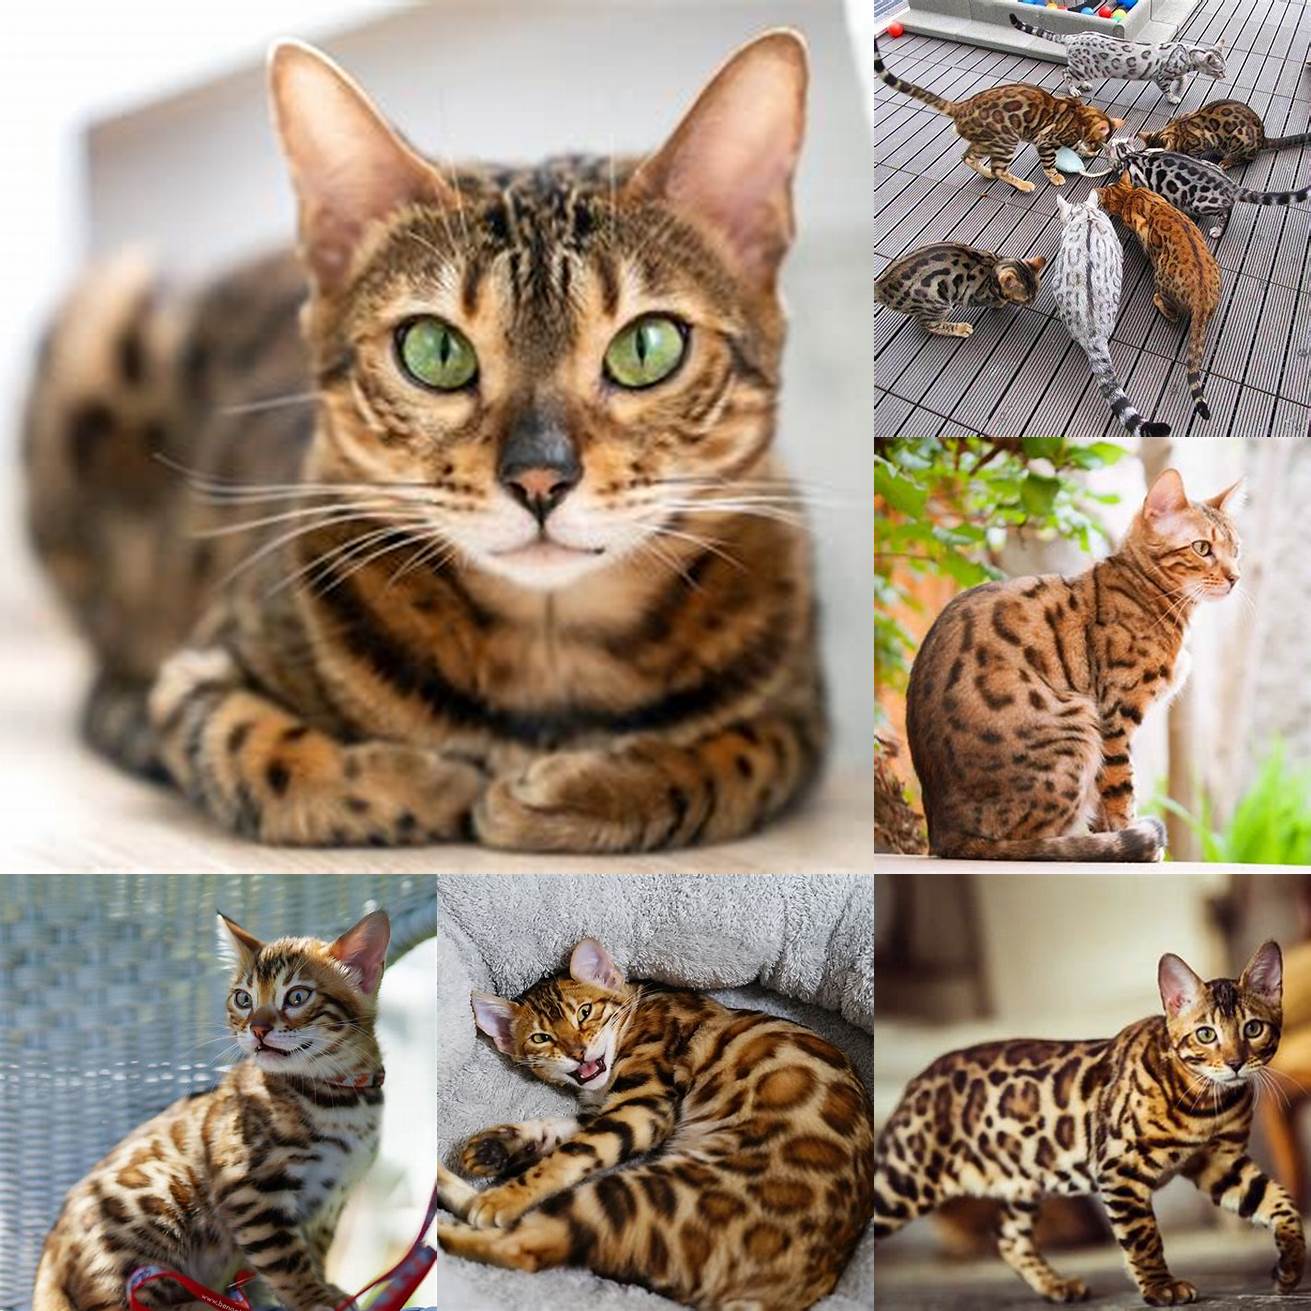 Bengal cats are social and enjoy human company